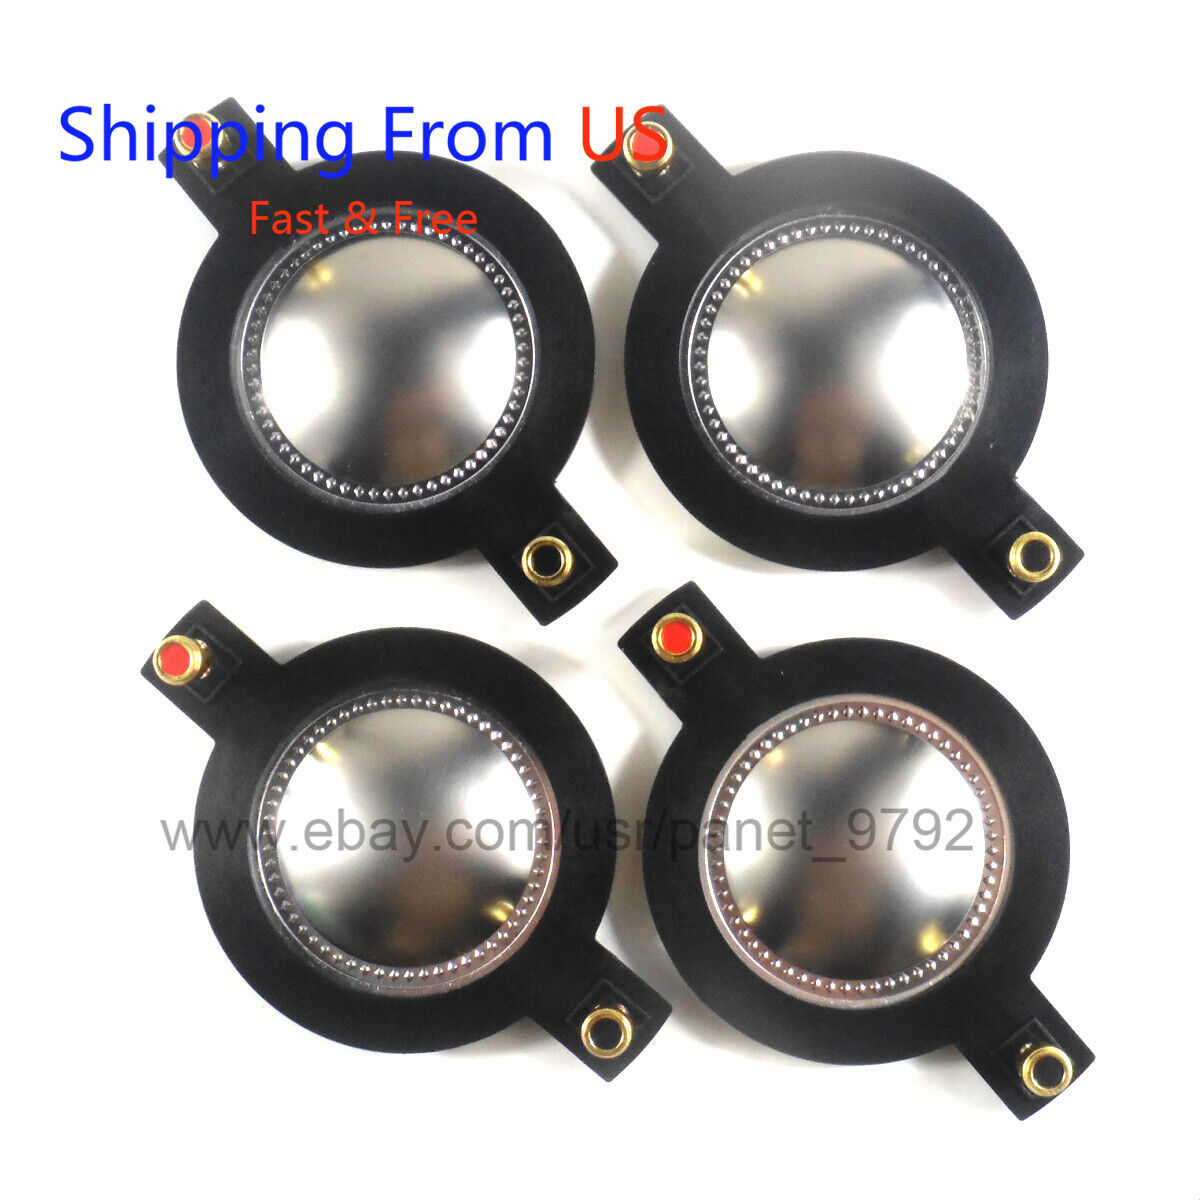 4pcs Diaphragm For Timpano TPT-RPDH2000 for TPT-DH2000 Horn Driver US STOCK Unbranded Does Not Apply